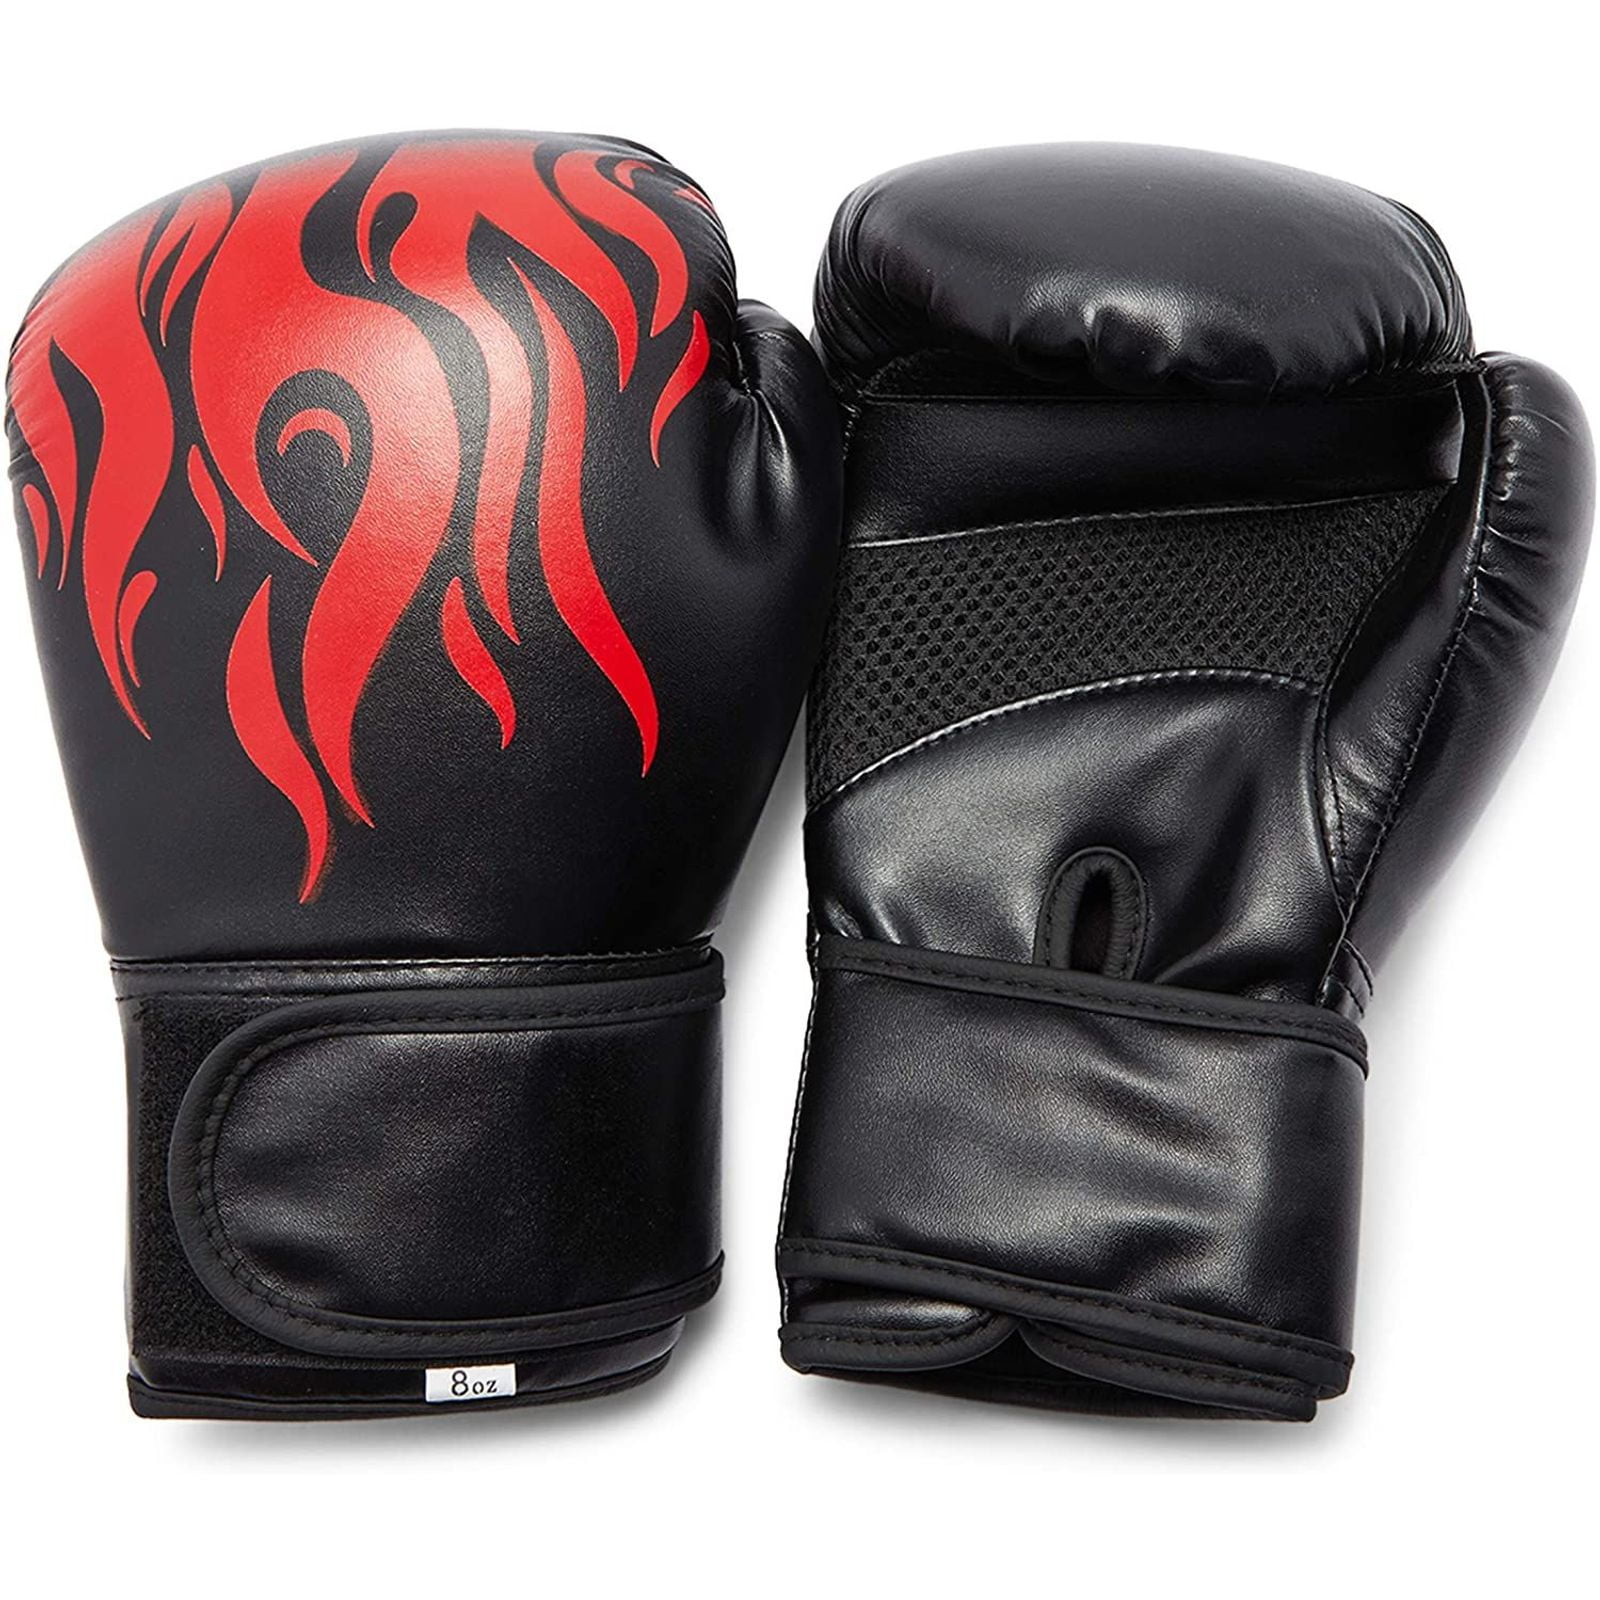 Leather Boxing Glove Kickboxing Sparring MMA Muay Thai Punch Mitten Red Black 